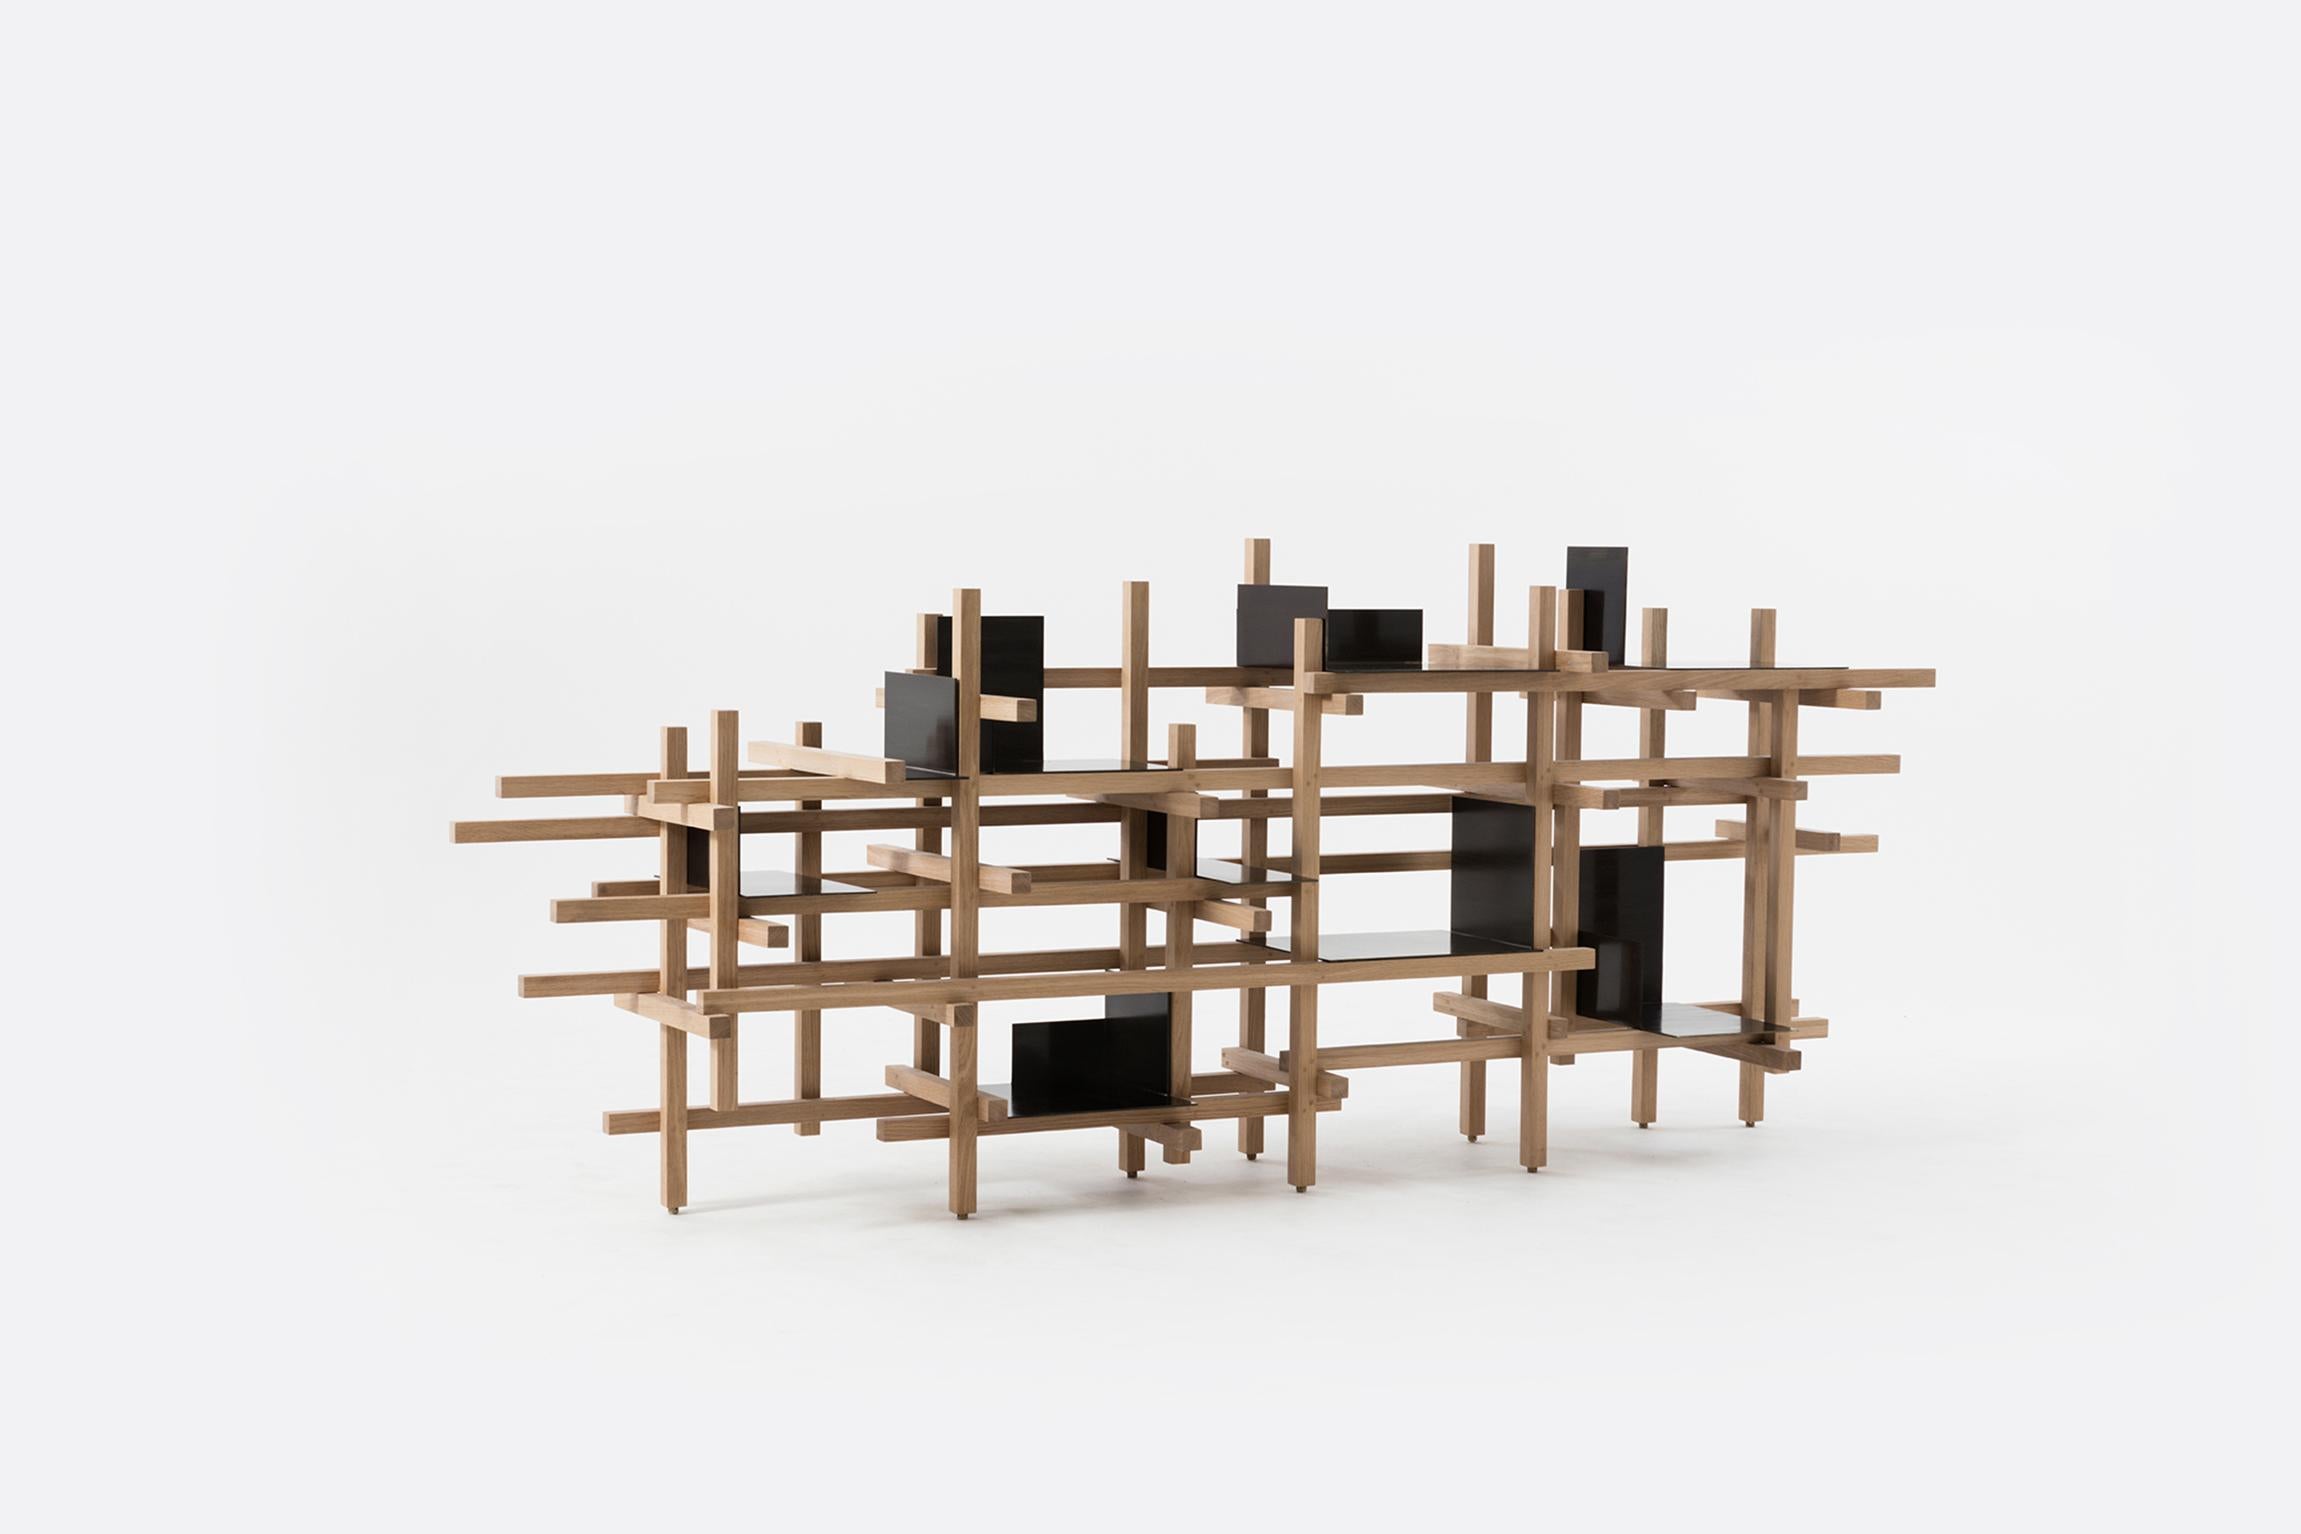 A limited edition made from wood and brass, inspired by the temporary structures
used in construction.
Designed asymmetrically, the latticework intersects with and is crisscrossed by wooden bolts. The primary wood structure supports a series of